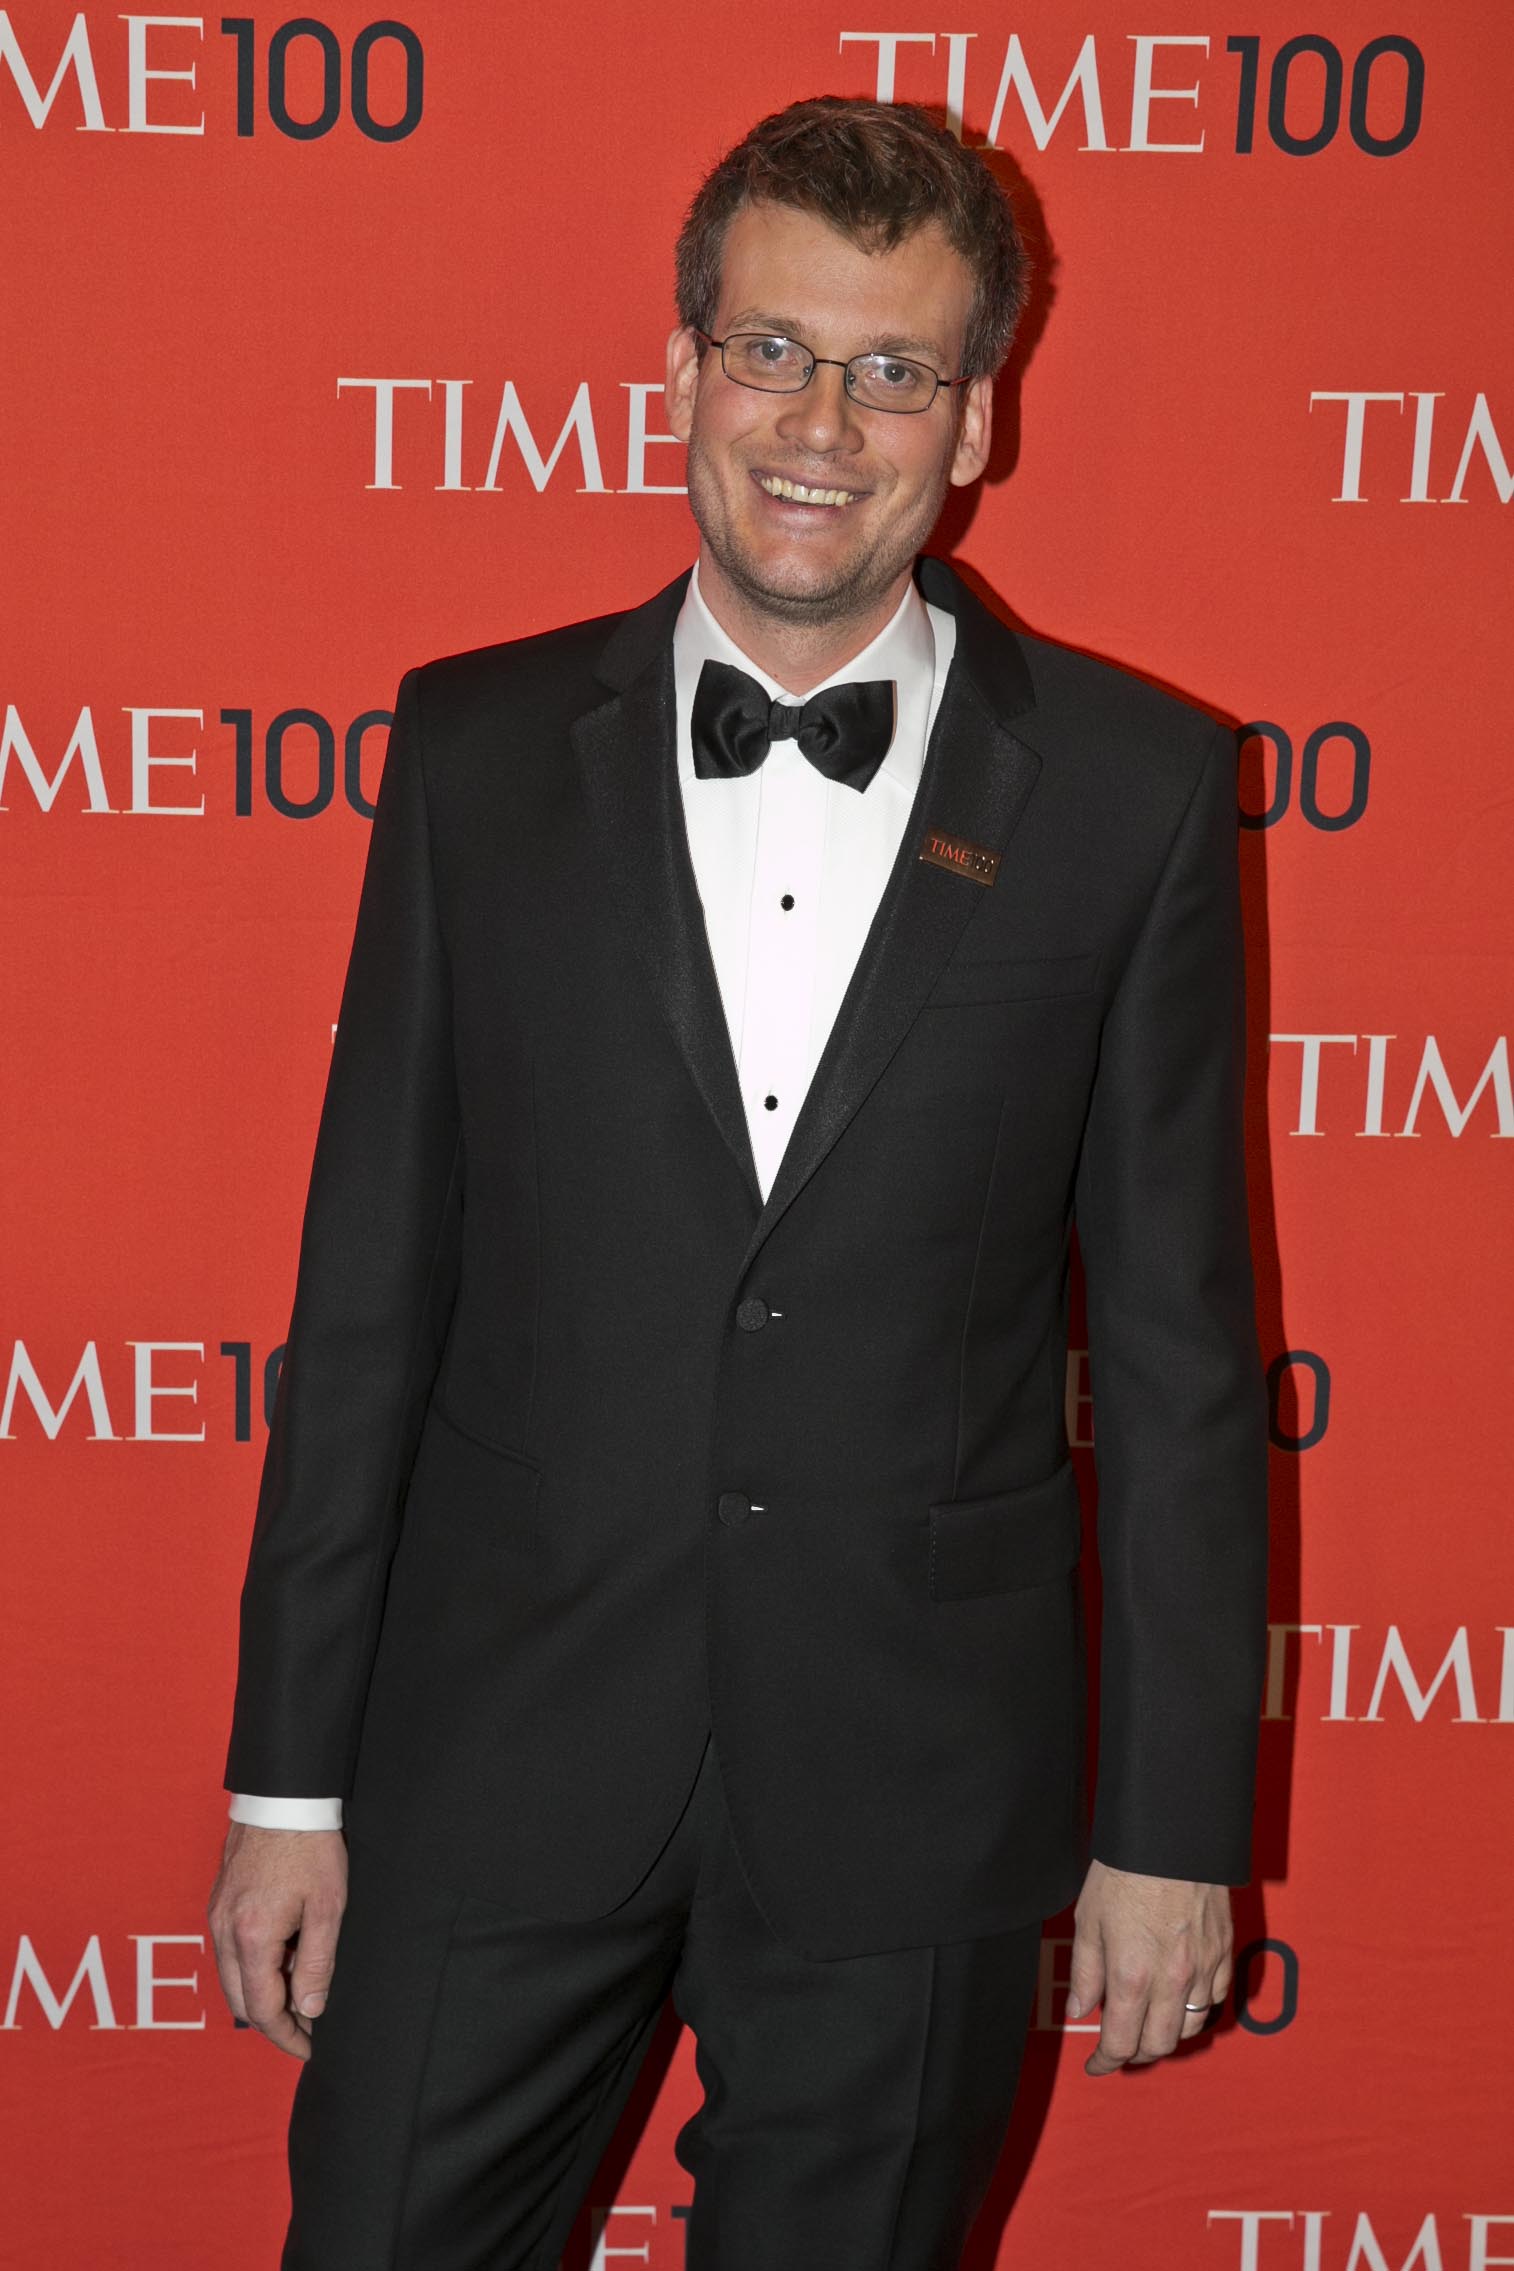 Honoree John Green at the Time 100 Gala at Jazz at Lincoln Center in New York on April, 29, 2014. (Jonathan D. Woods for TIME)